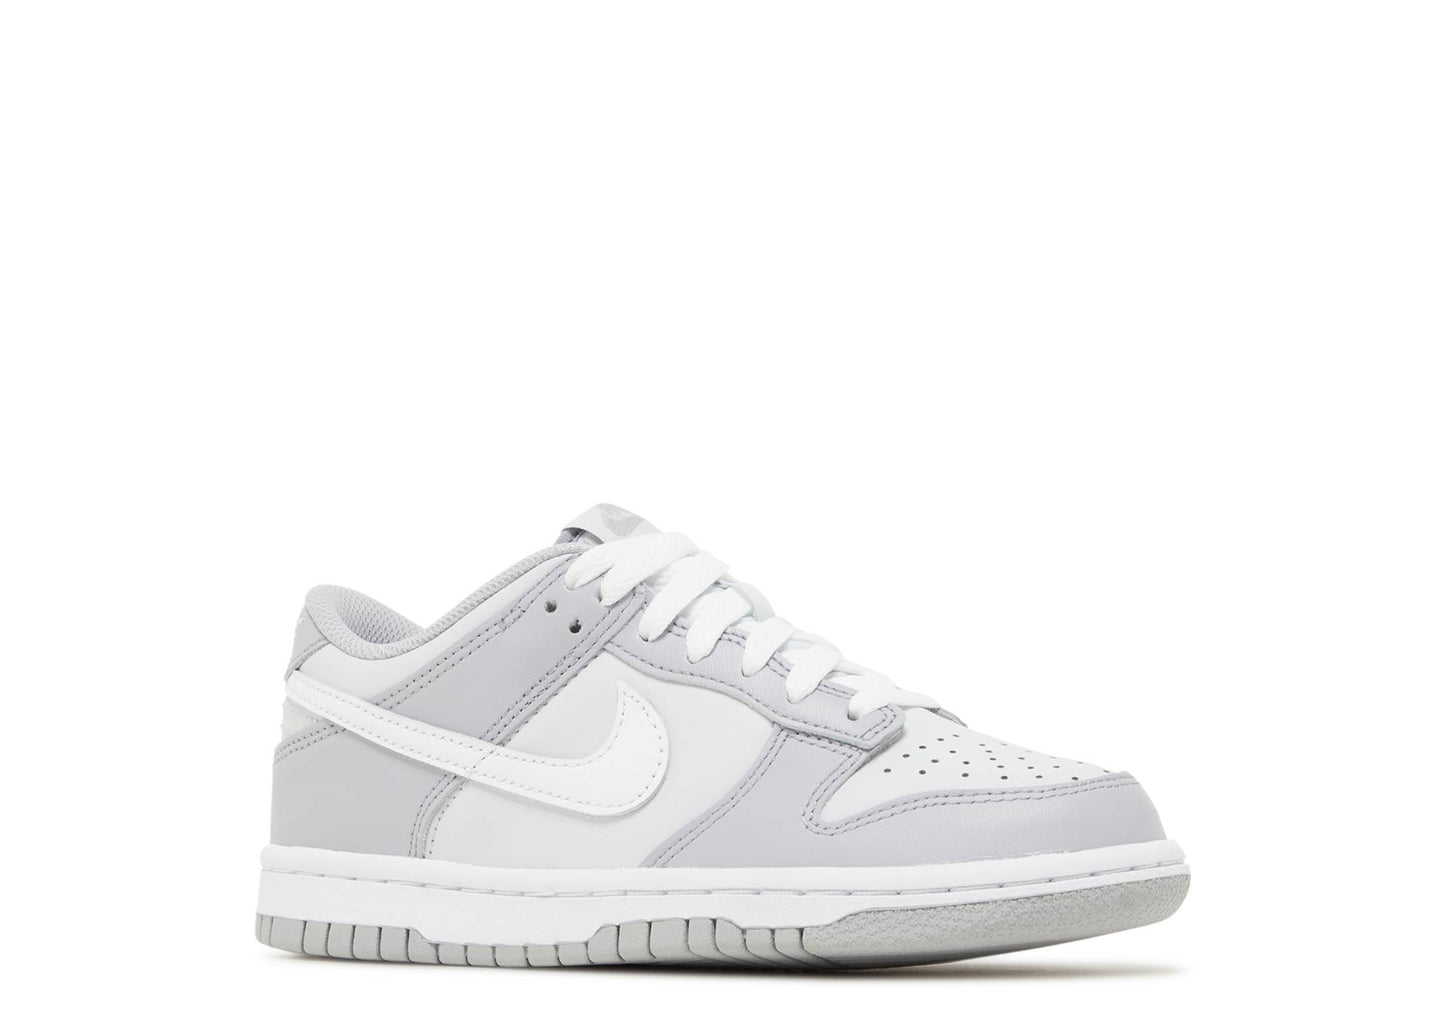 Nike Dunk Low PS "Two-Tone Grey/Pure Platinum"